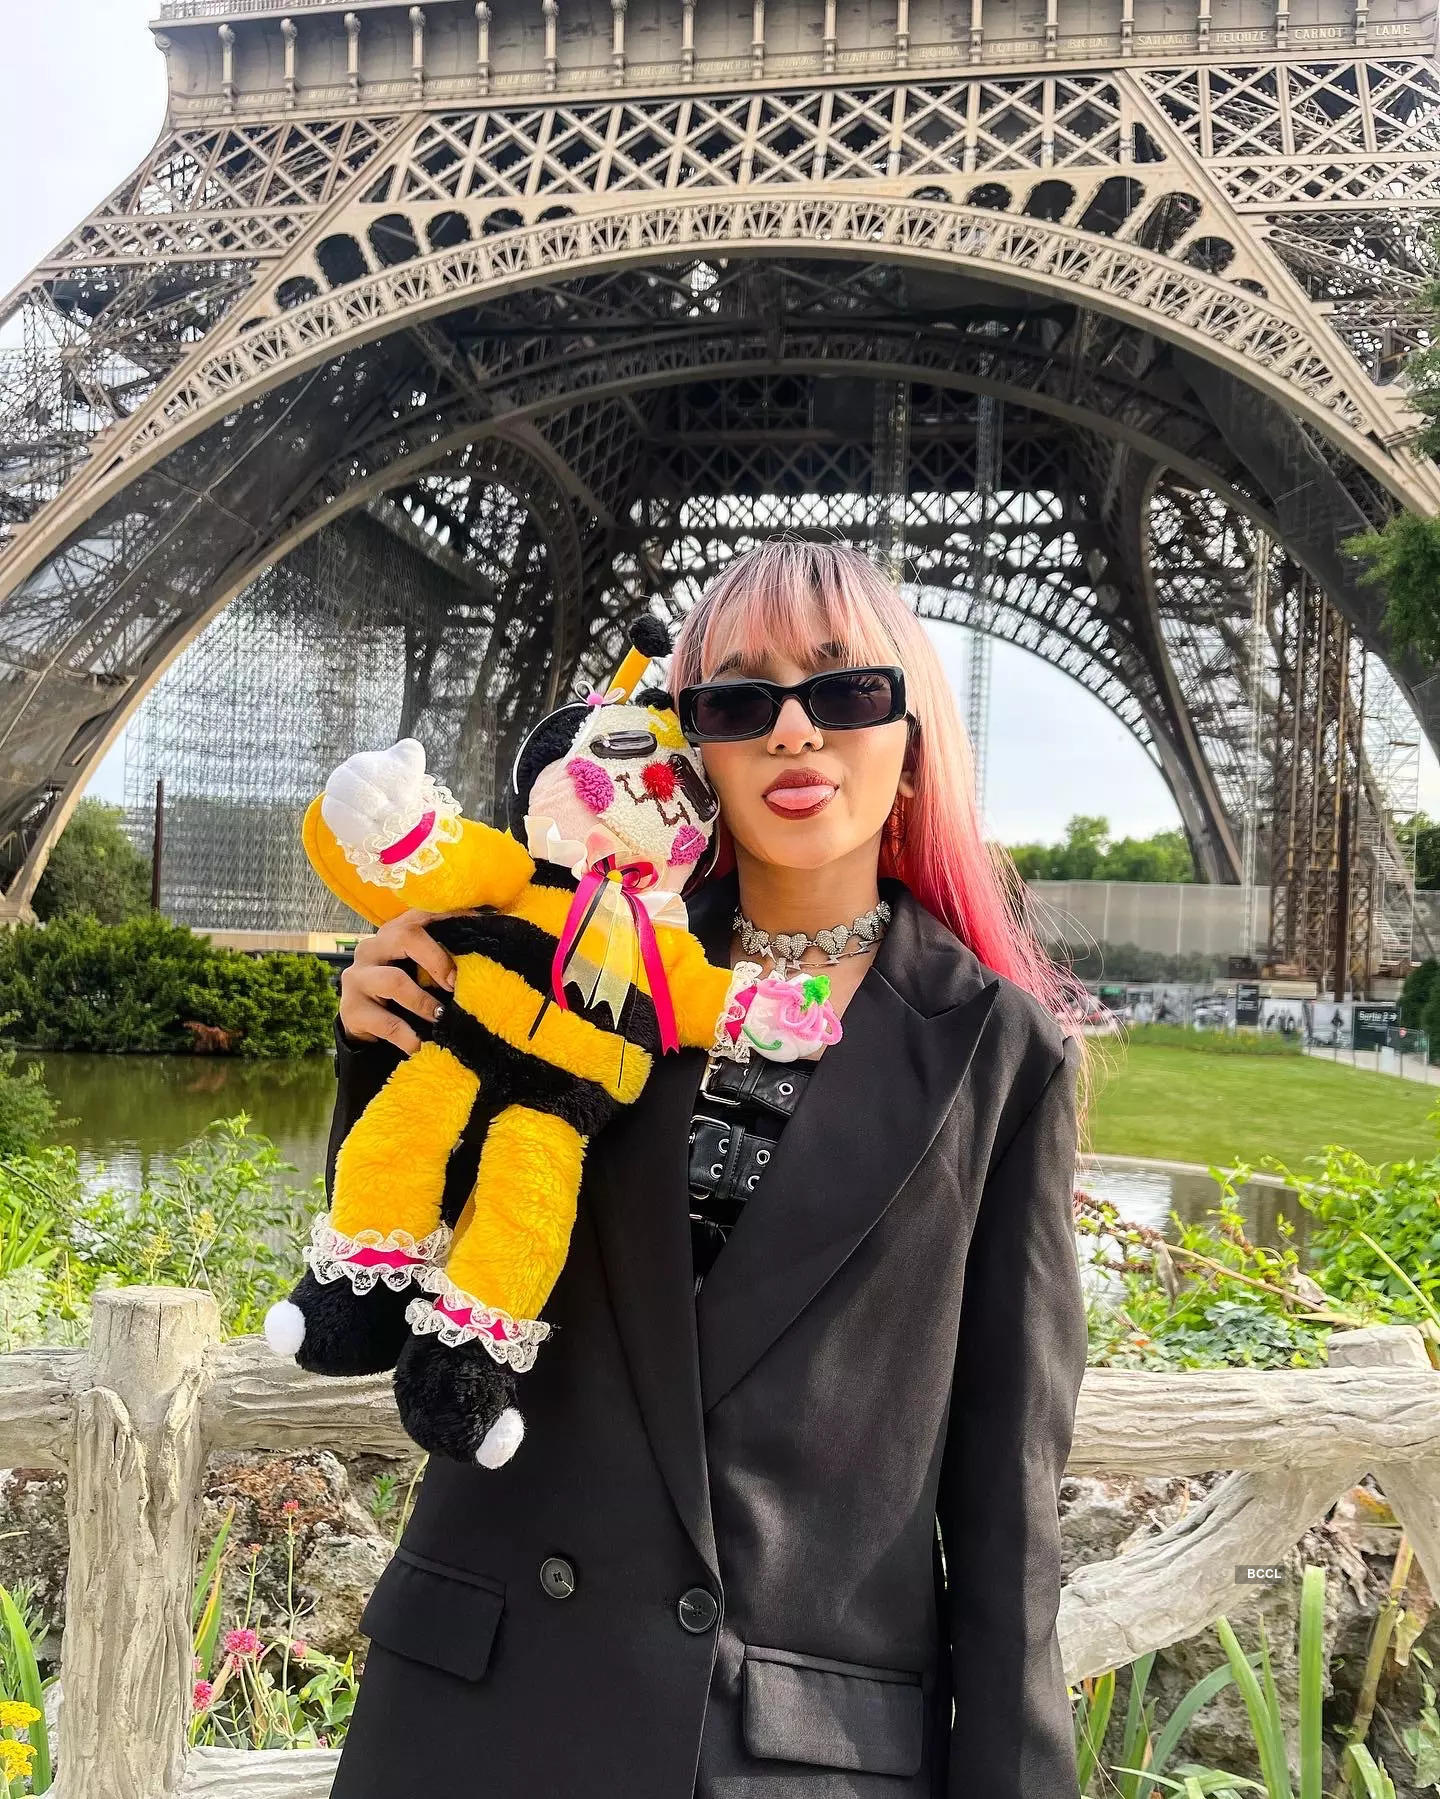 Social media sensation “TheMermaidscales” attends Meta’s immersive learning initiative at Cannes Lions France